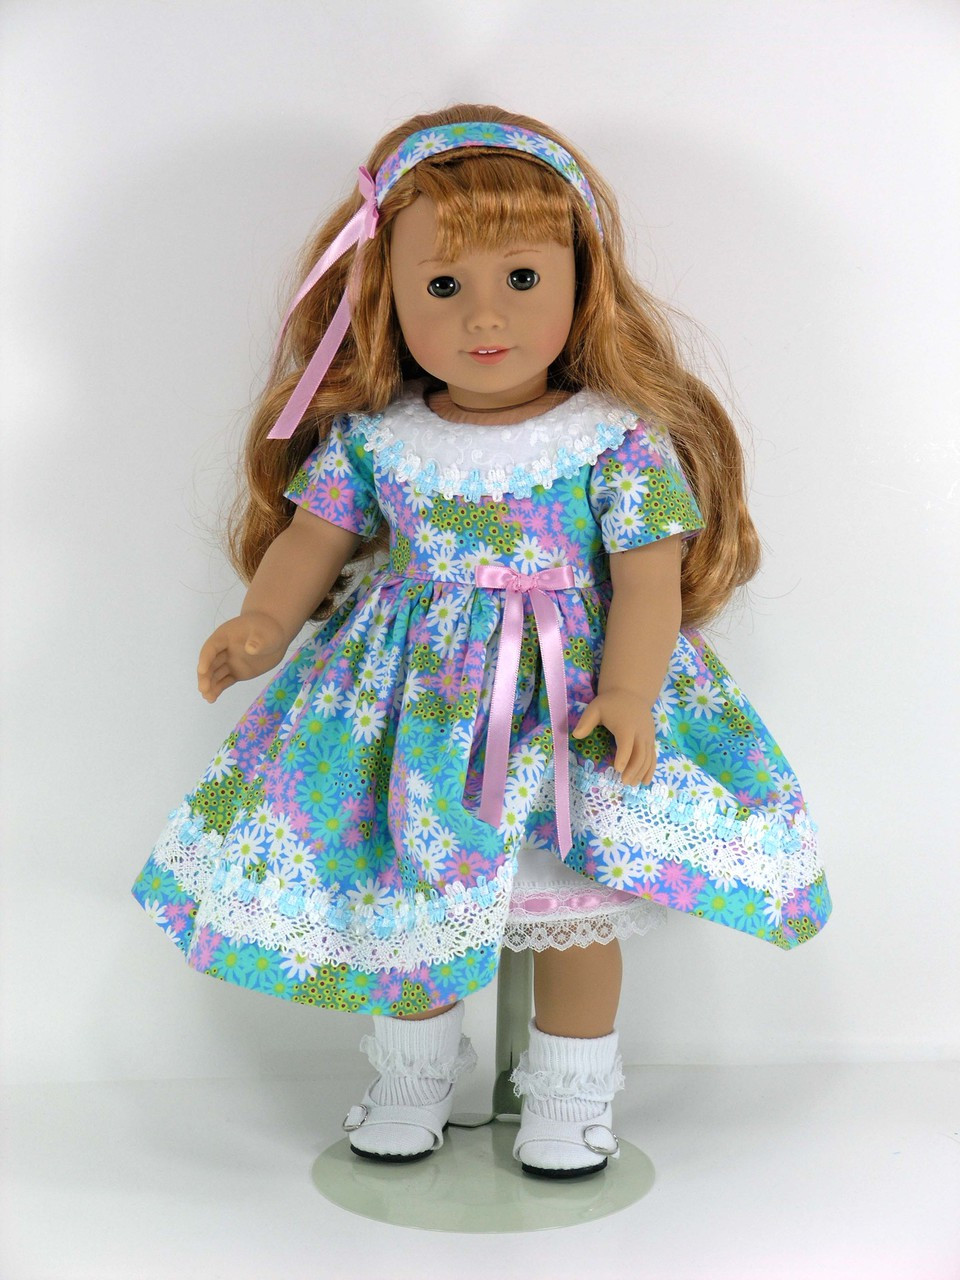 Handmade Clothes for American Doll - Dress, Headband, Pantaloons - Blue,  Pink Flowers - Exclusively Linda Doll Clothes